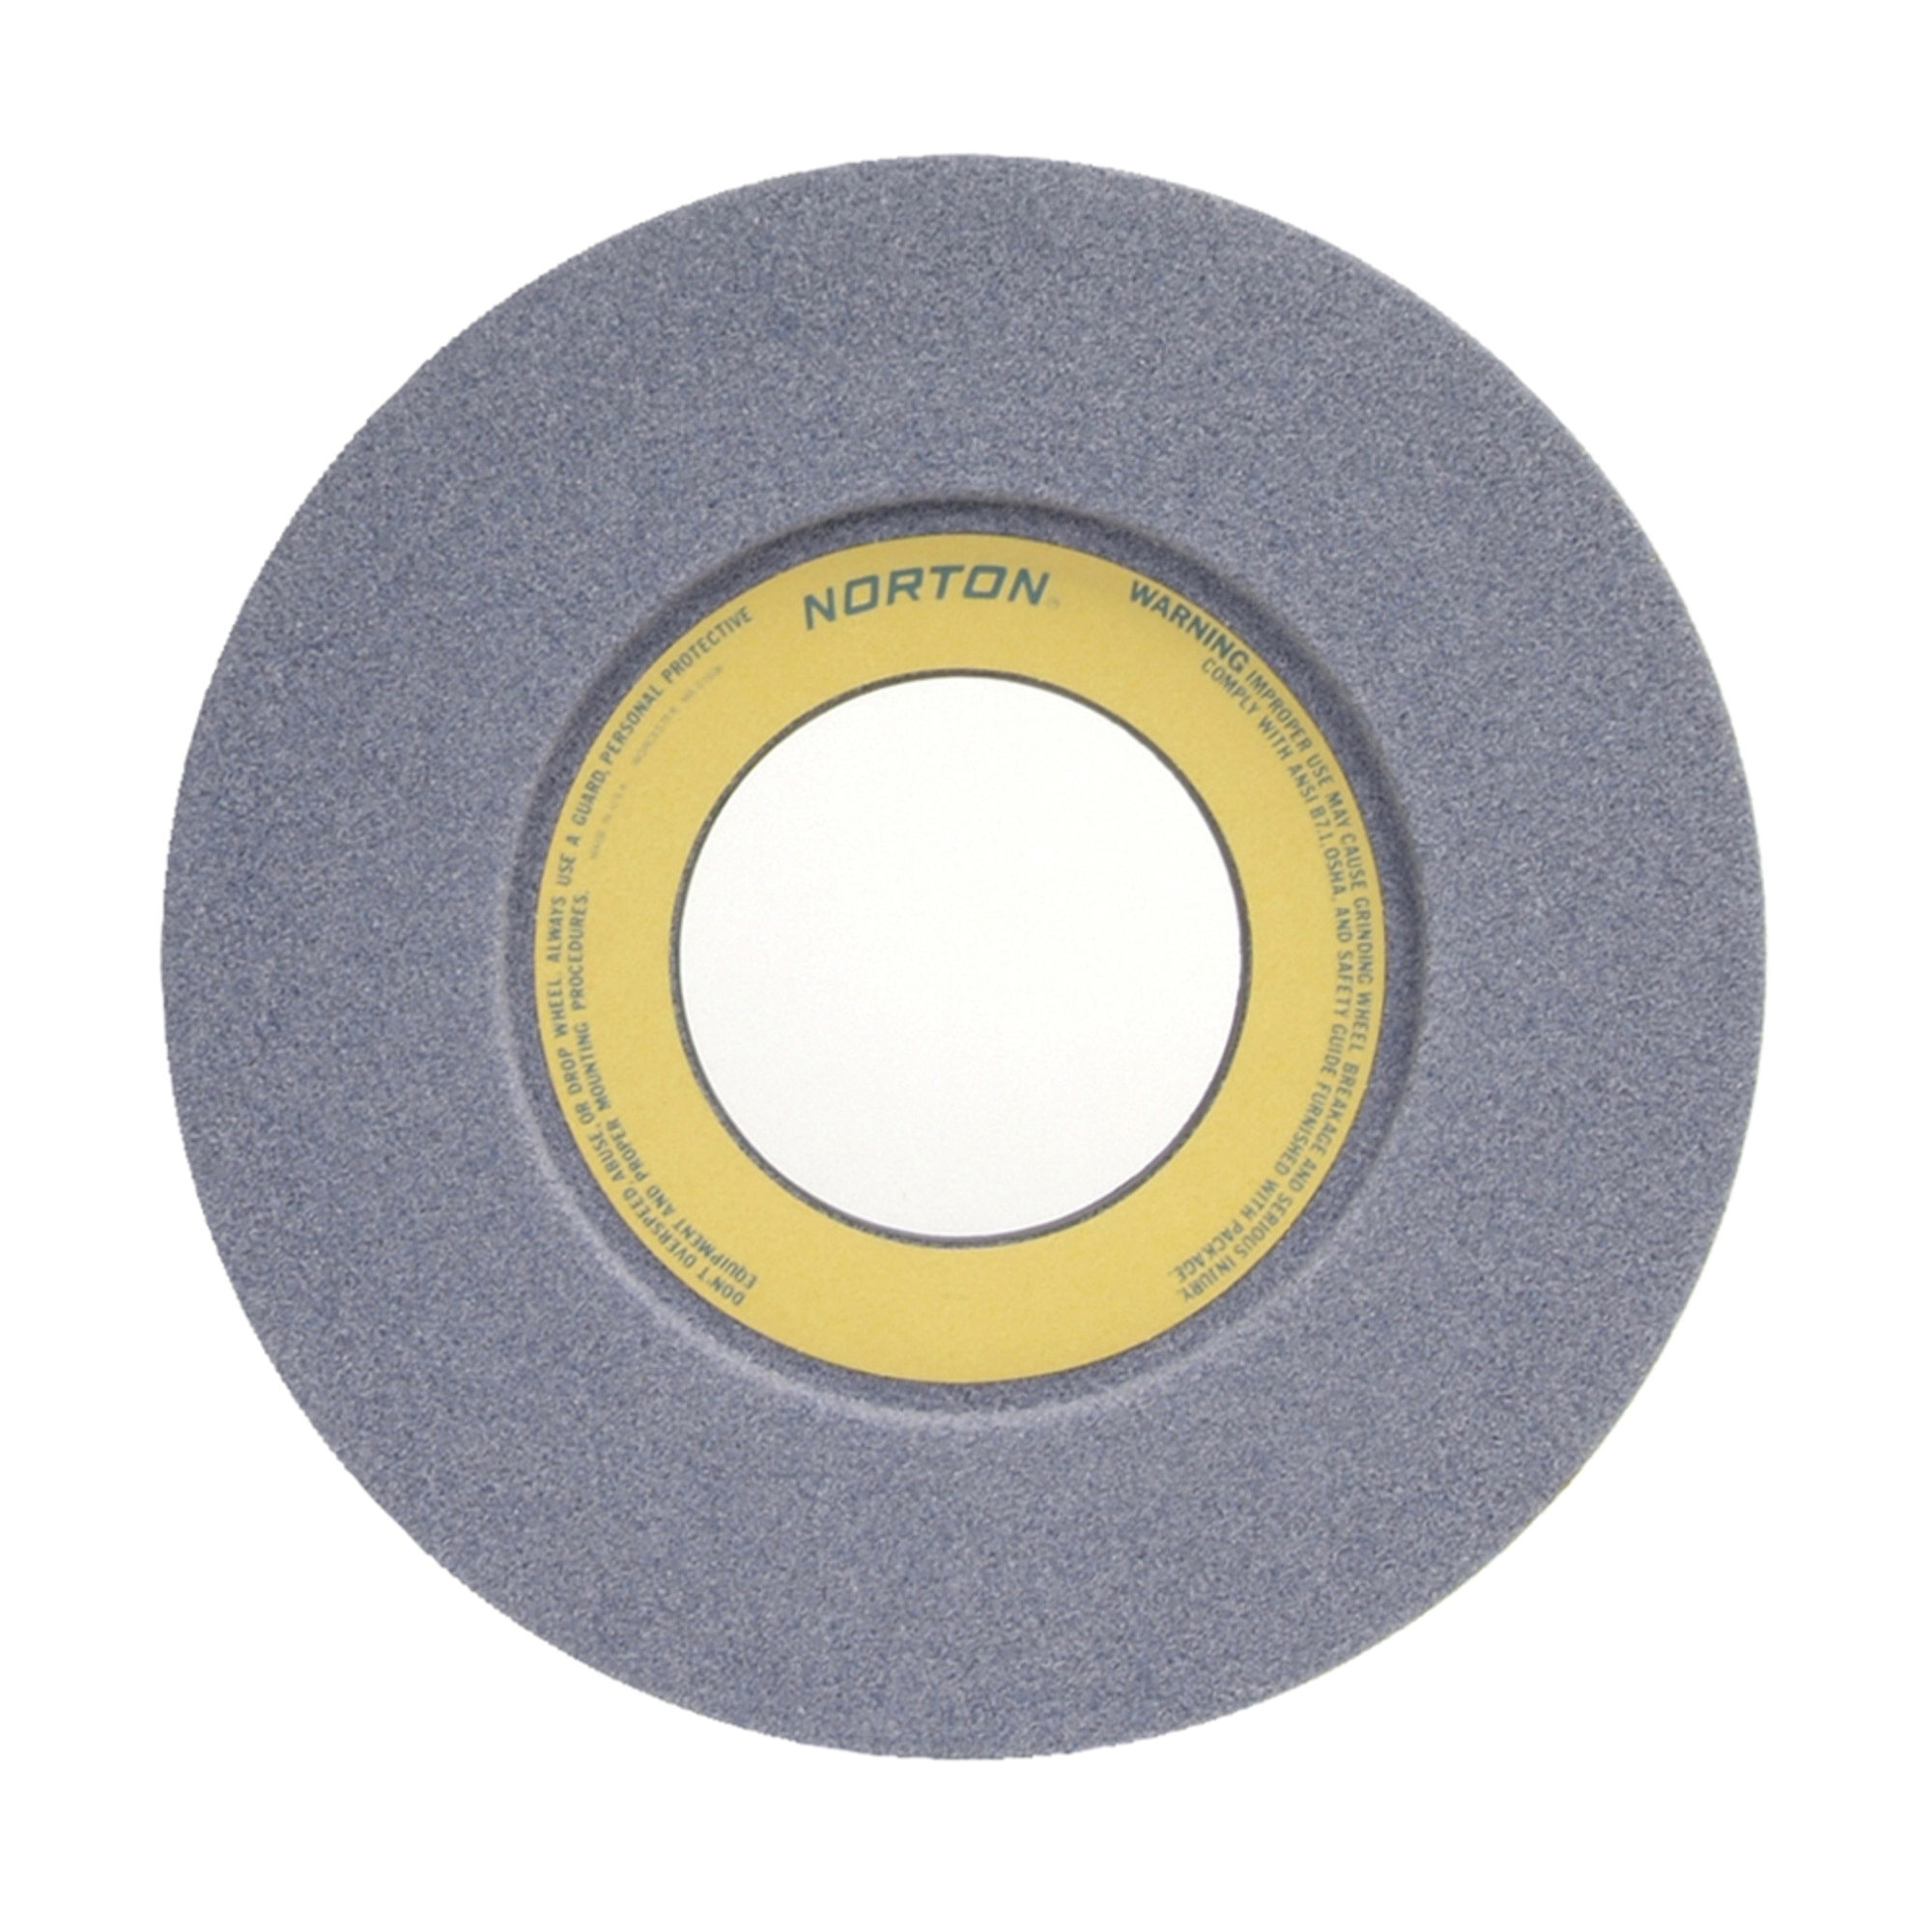 Norton® 66253364364 32A 1-Side Recessed Toolroom Wheel, 14 in Dia x 1-1/2 in THK, 5 in Center Hole, 60 Grit, Aluminum Oxide Abrasive